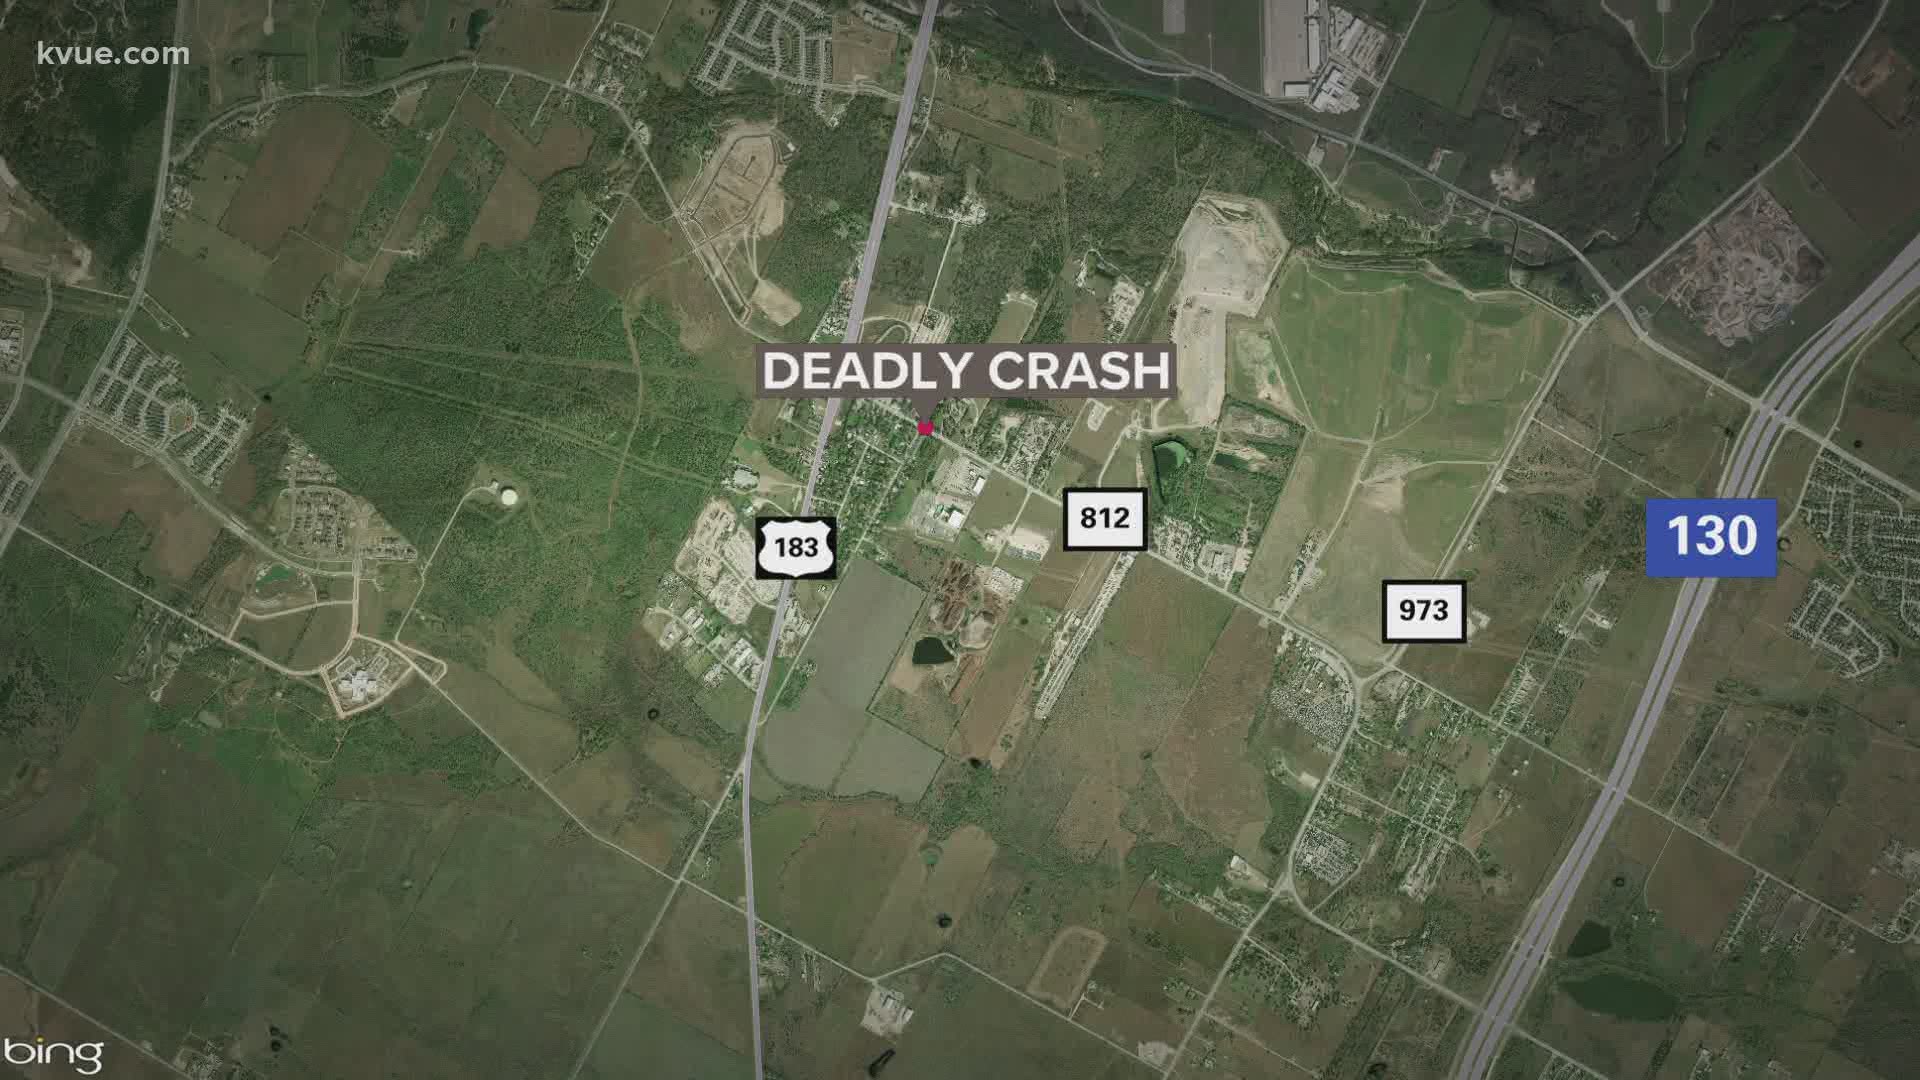 One person was killed in a two-vehicle crash in Del Valle early Saturday morning.